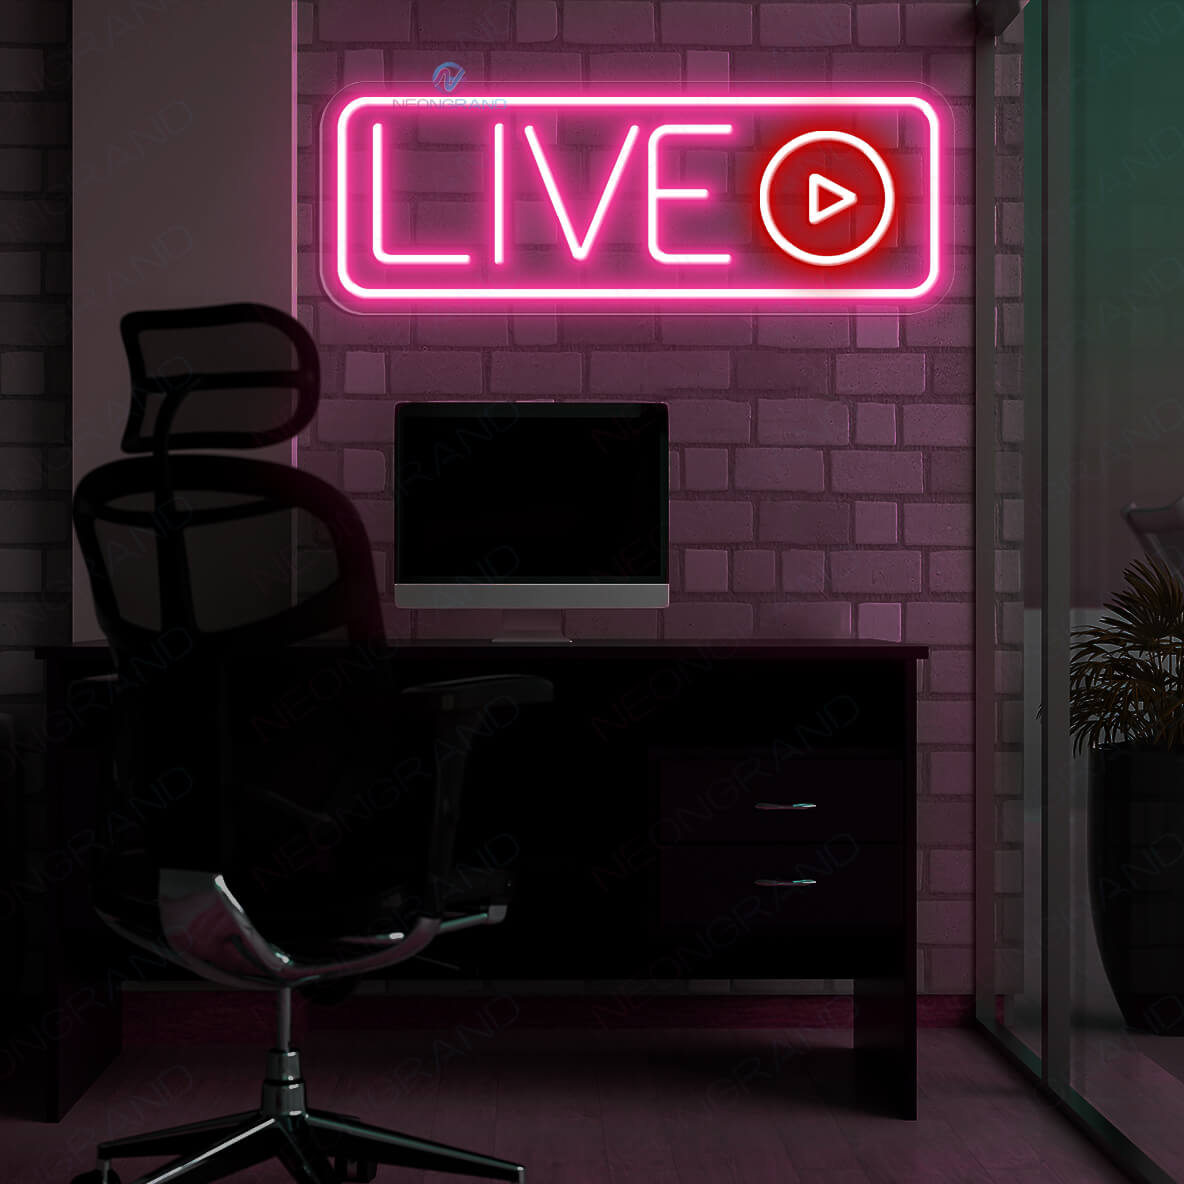 Live Neon Sign Recording Neon Sign Led Light pink